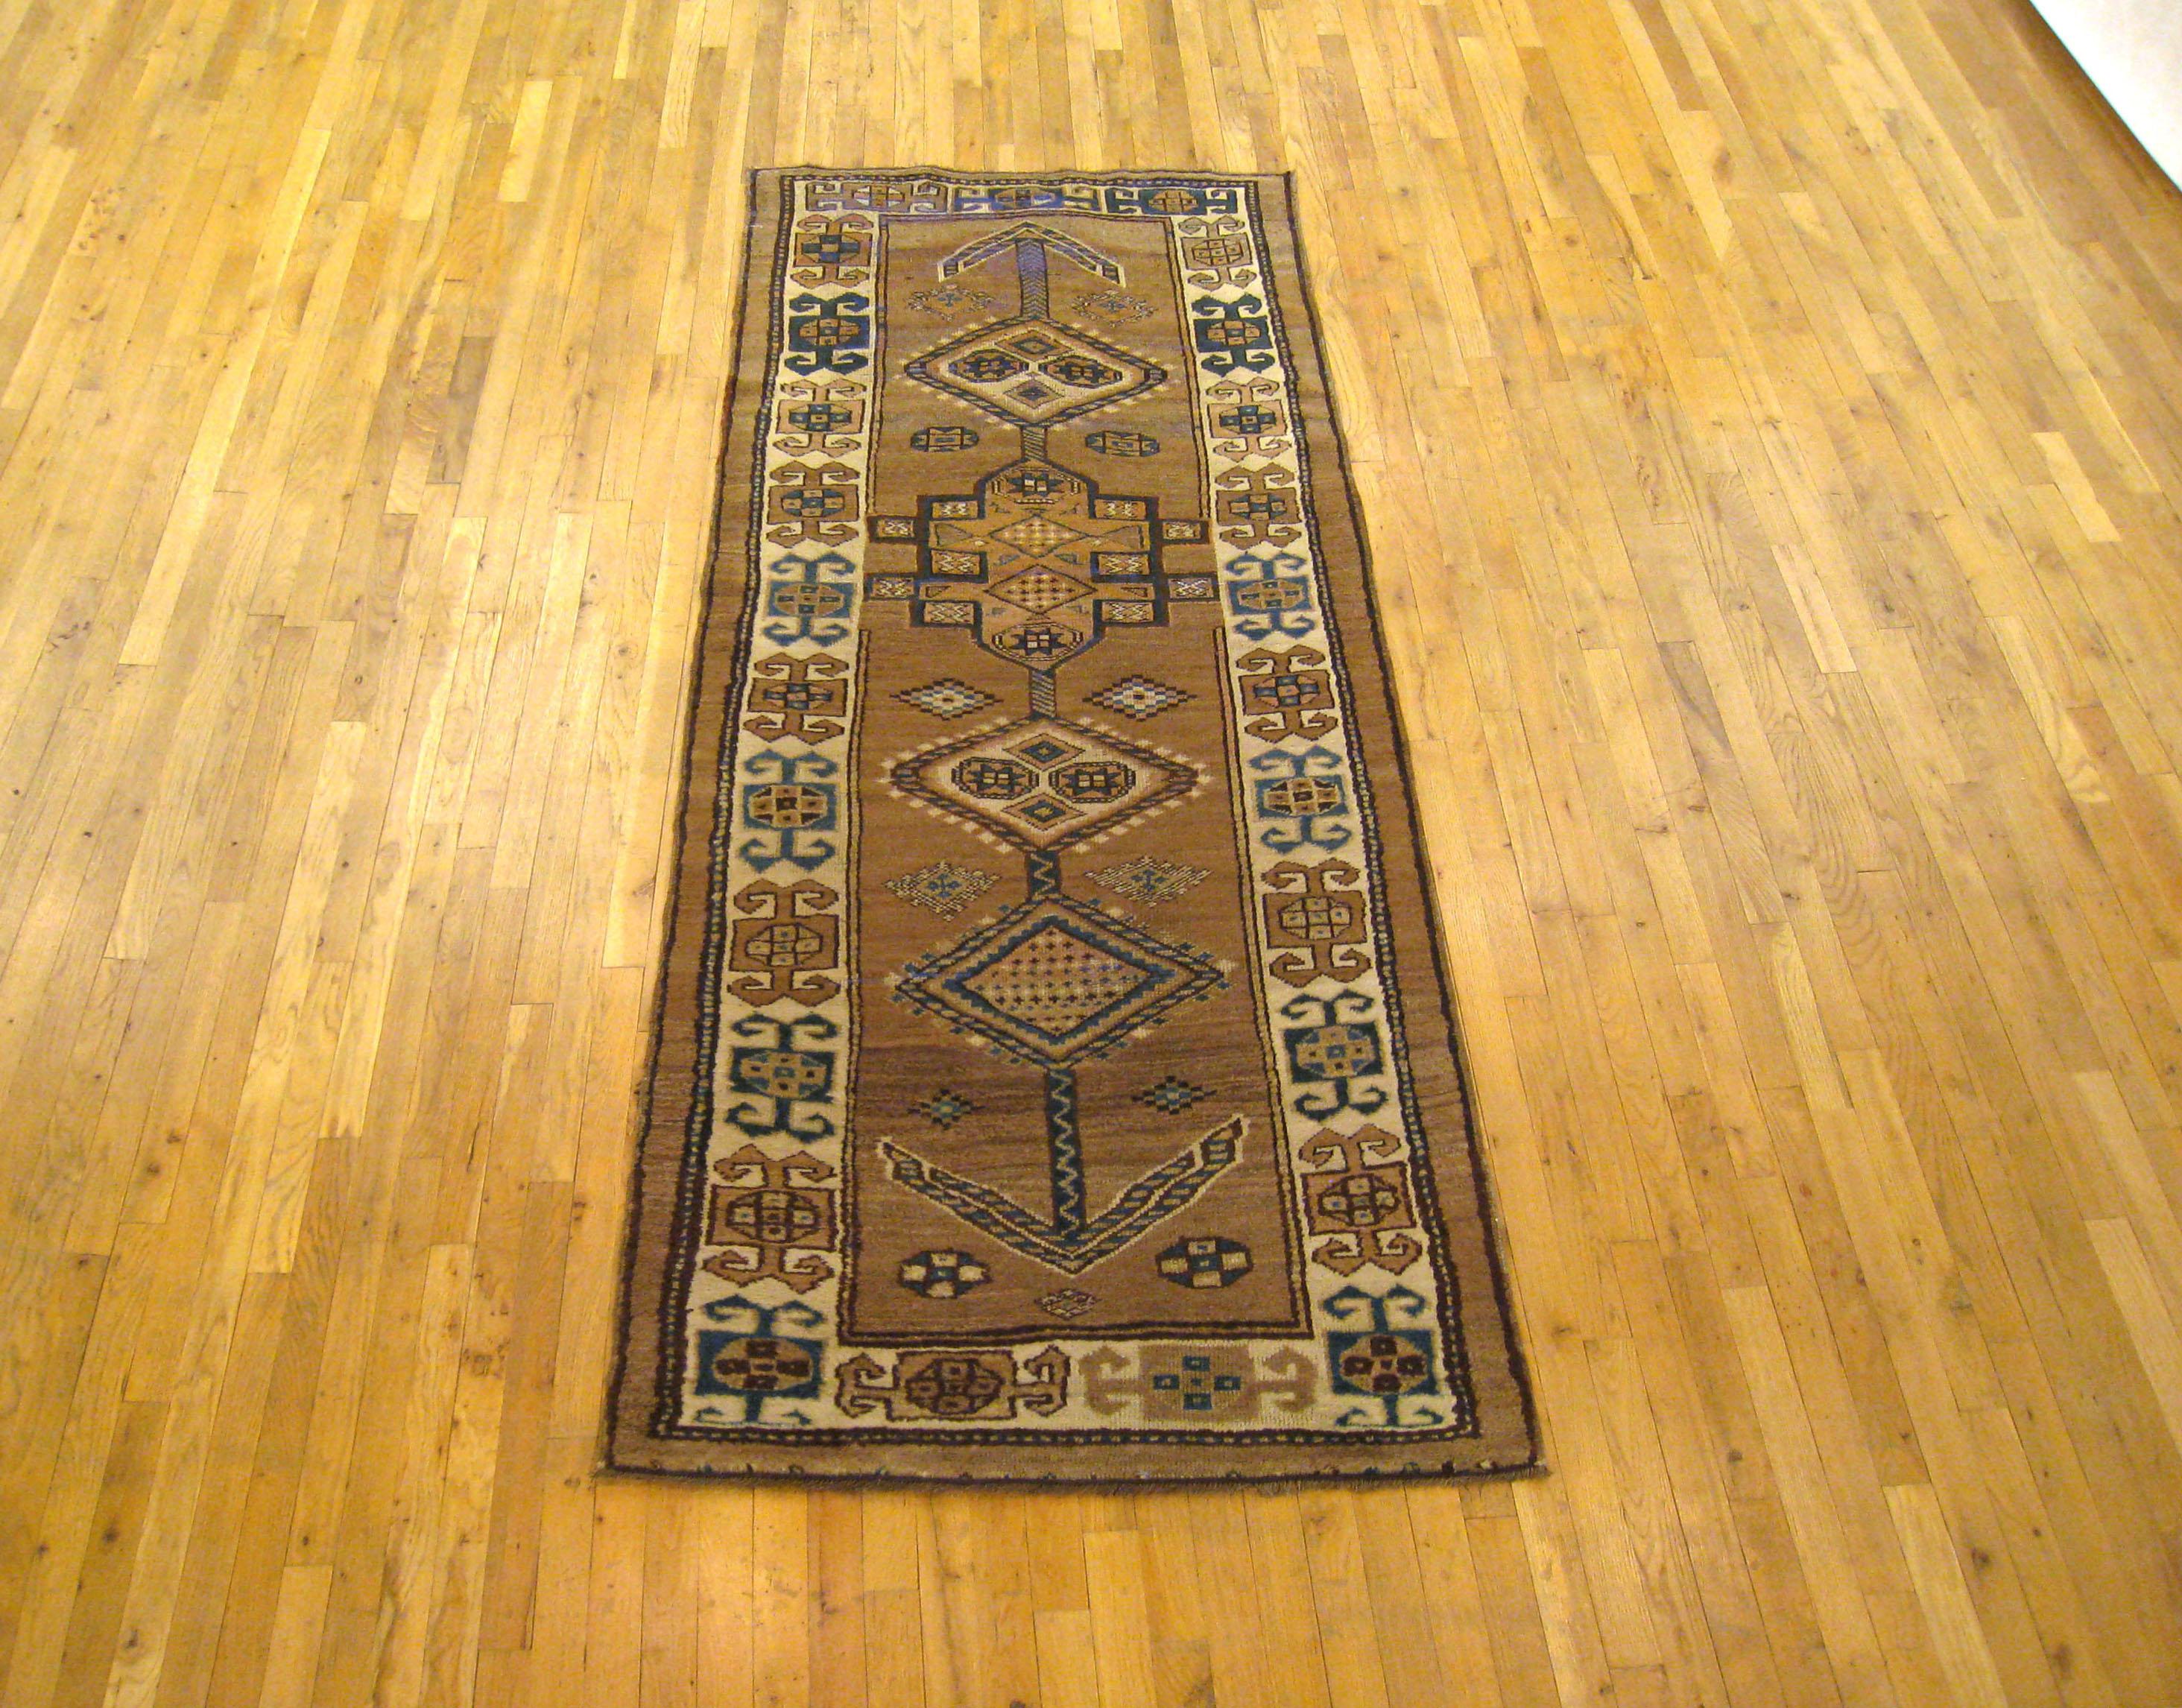 An antique Persian Serab Camel Hair oriental rug, size 8'7 x 3'2, circa 1900. This handsome hand knotted wool carpet is characterized by a tribal design at centre, with several angular medallions leading to an end point in either direction. The dark